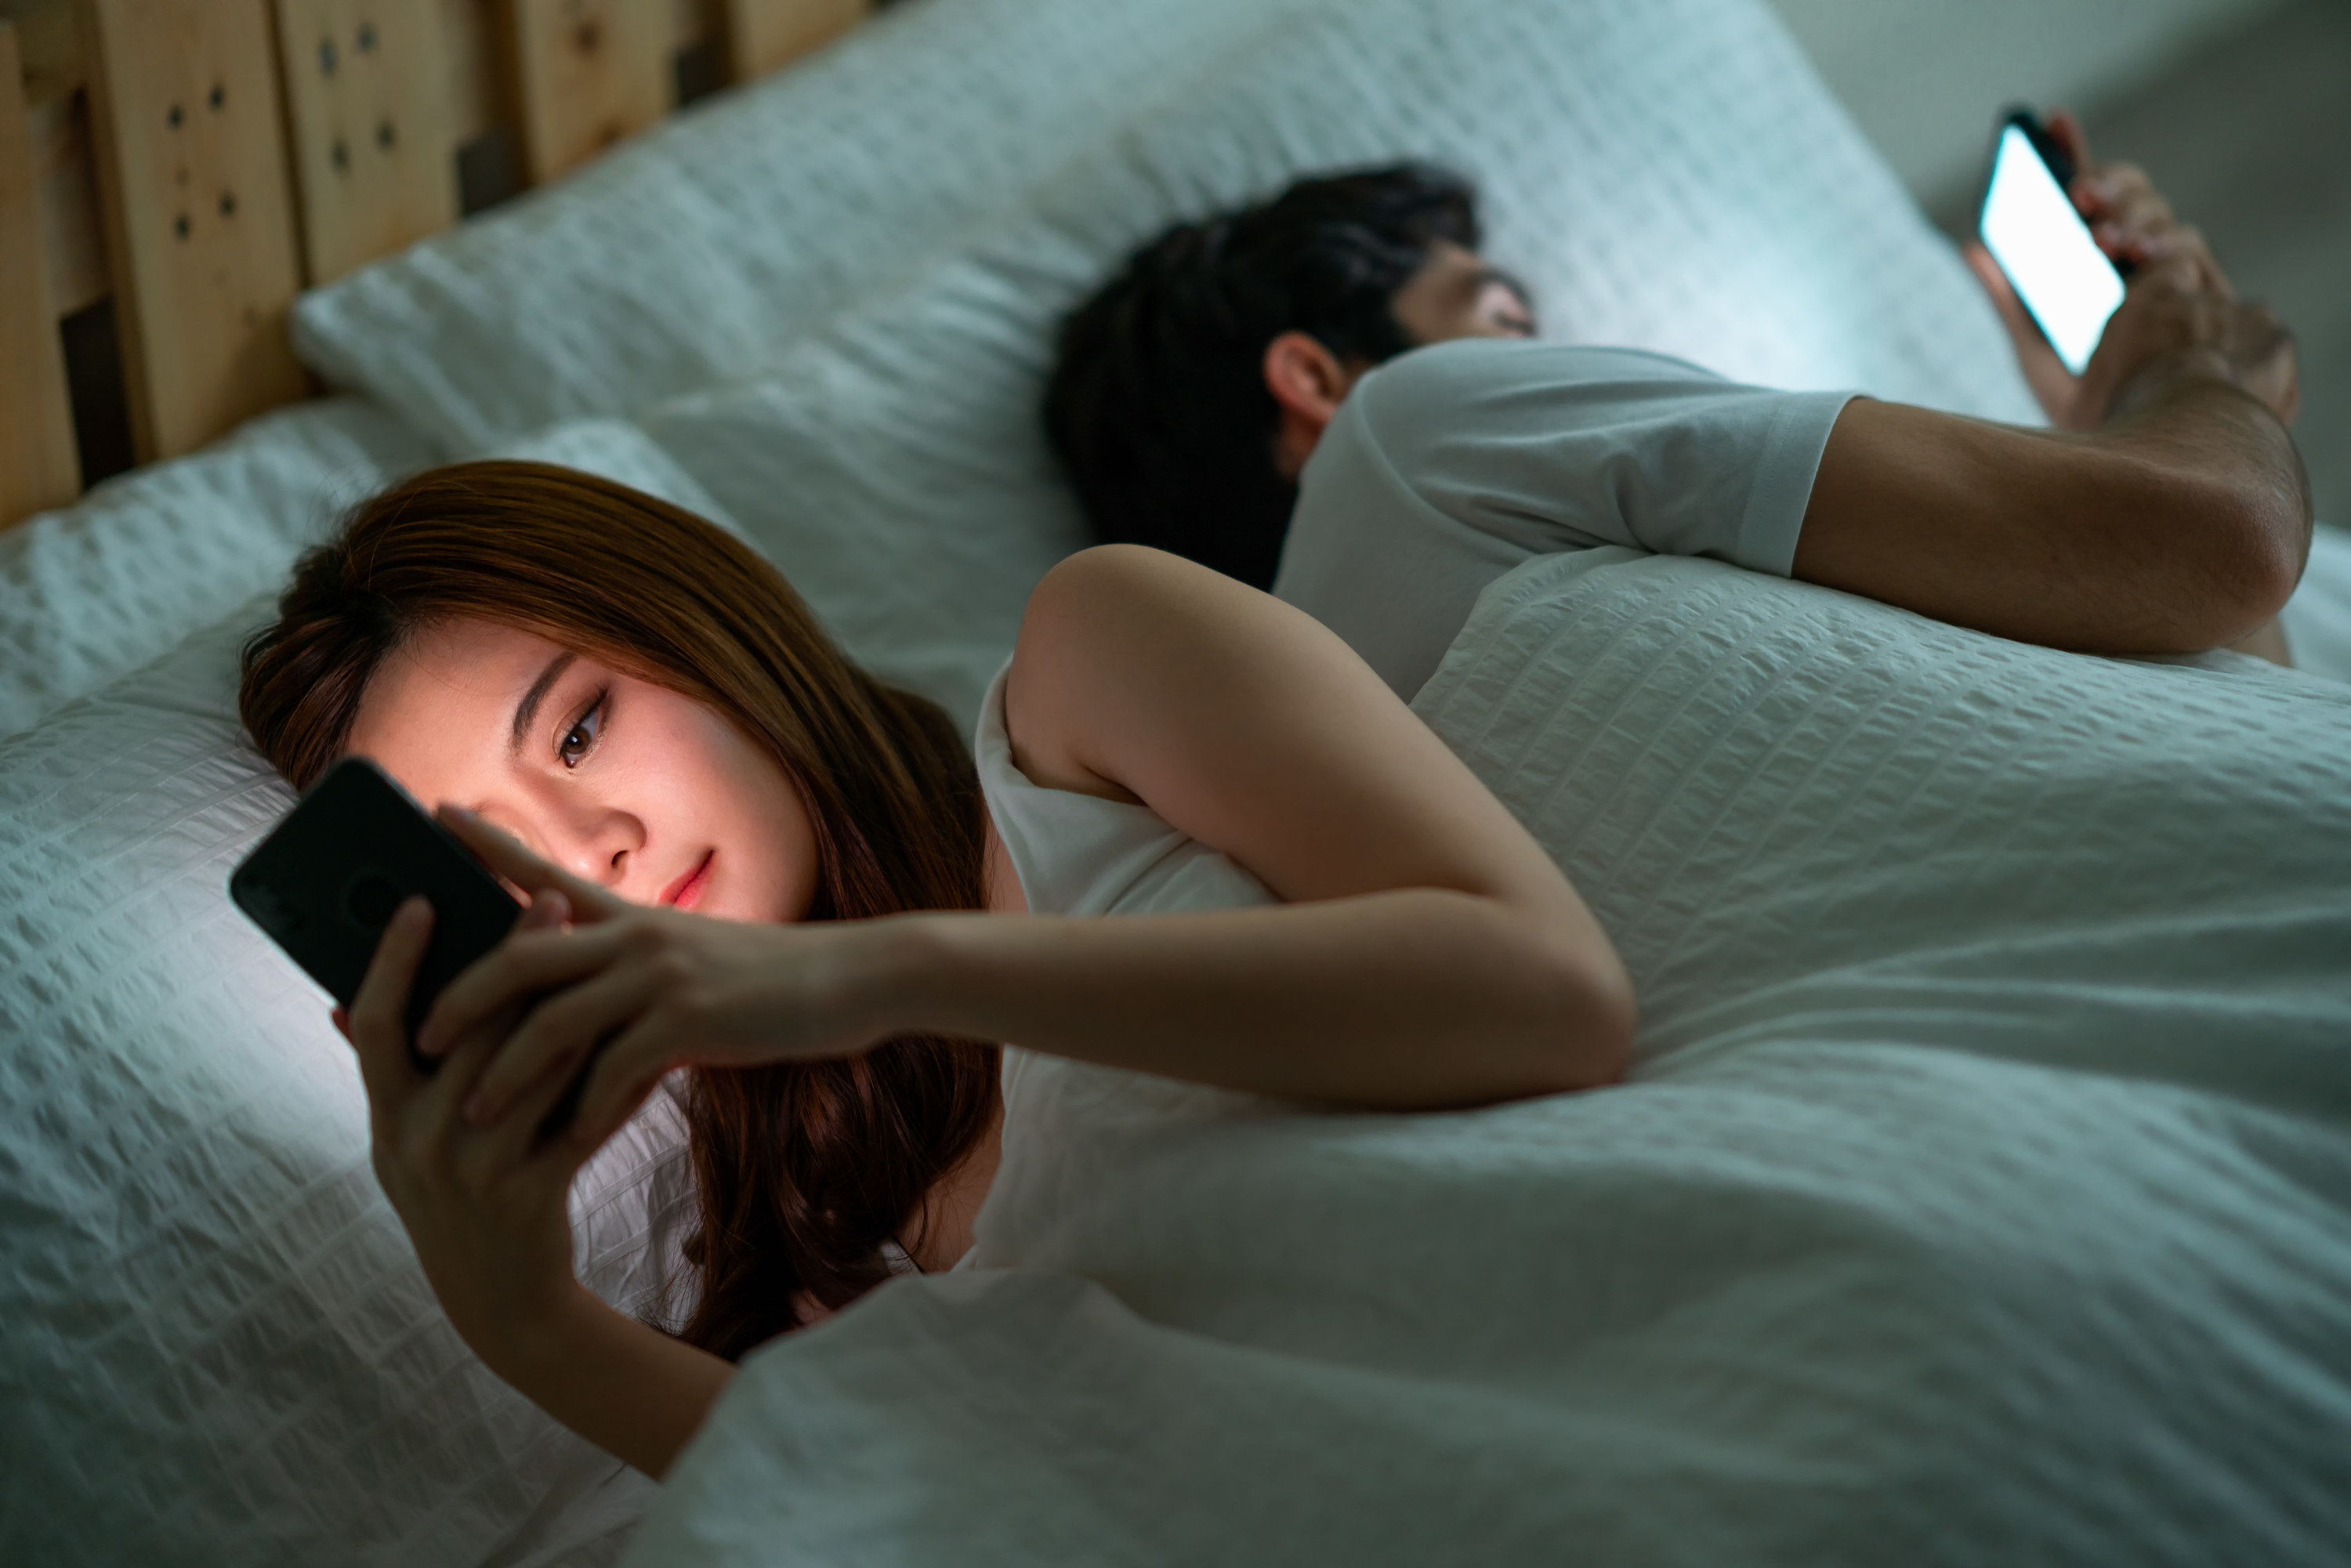 A man and a woman each on their phones in bed with their backs facing each other